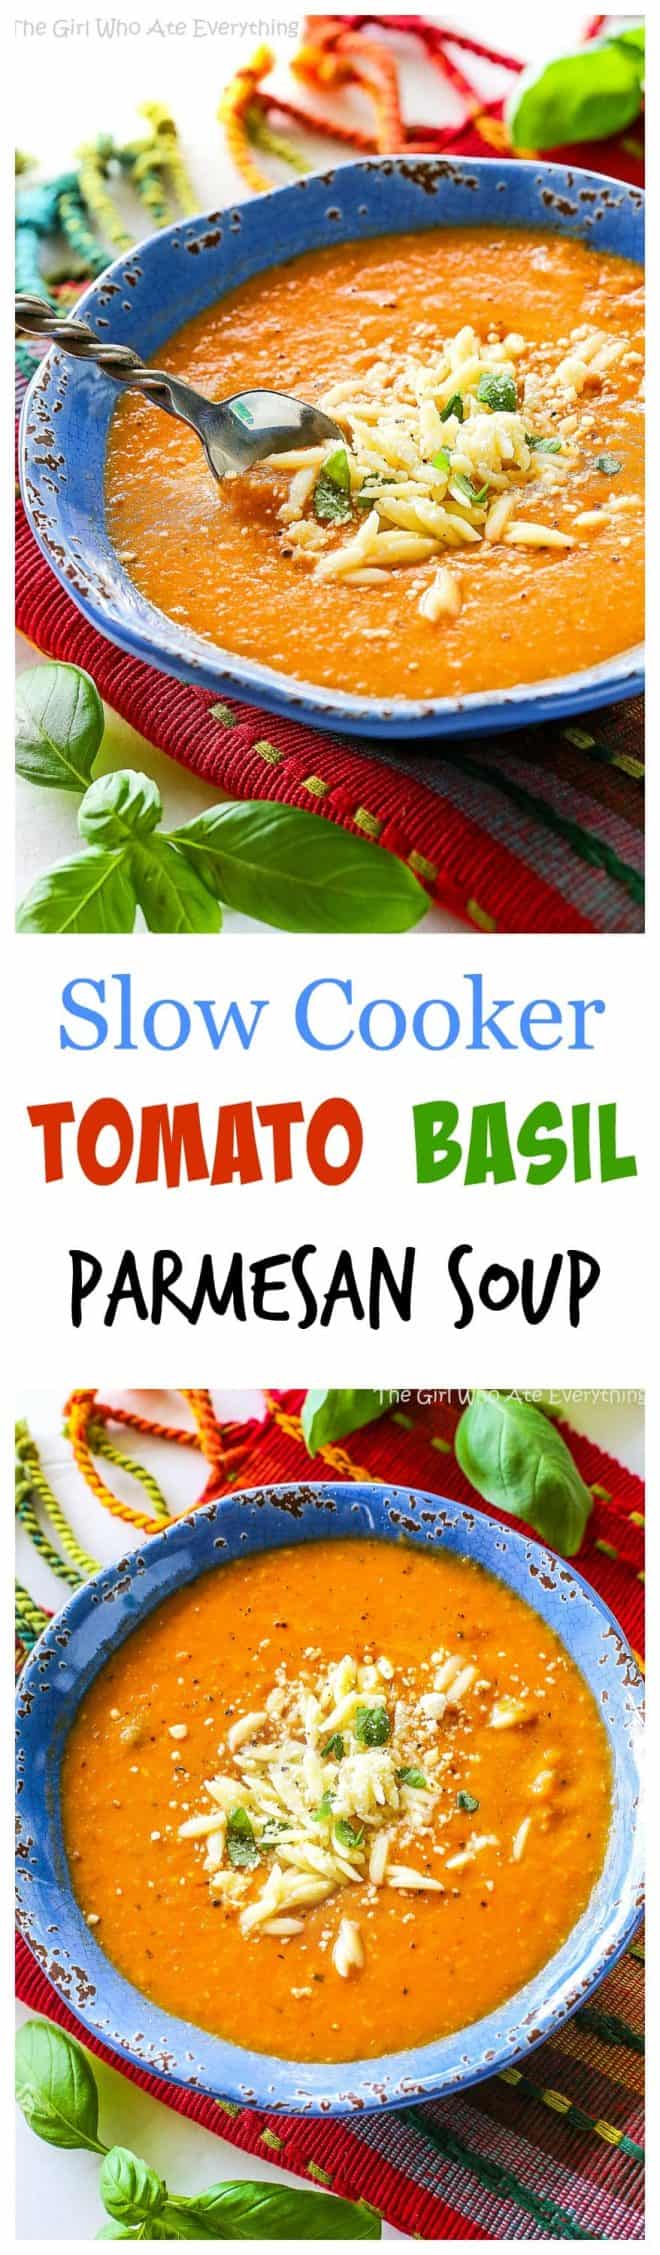 Slow Cooker Tomato Basil Parmesan Soup - The Girl Who Ate Everything